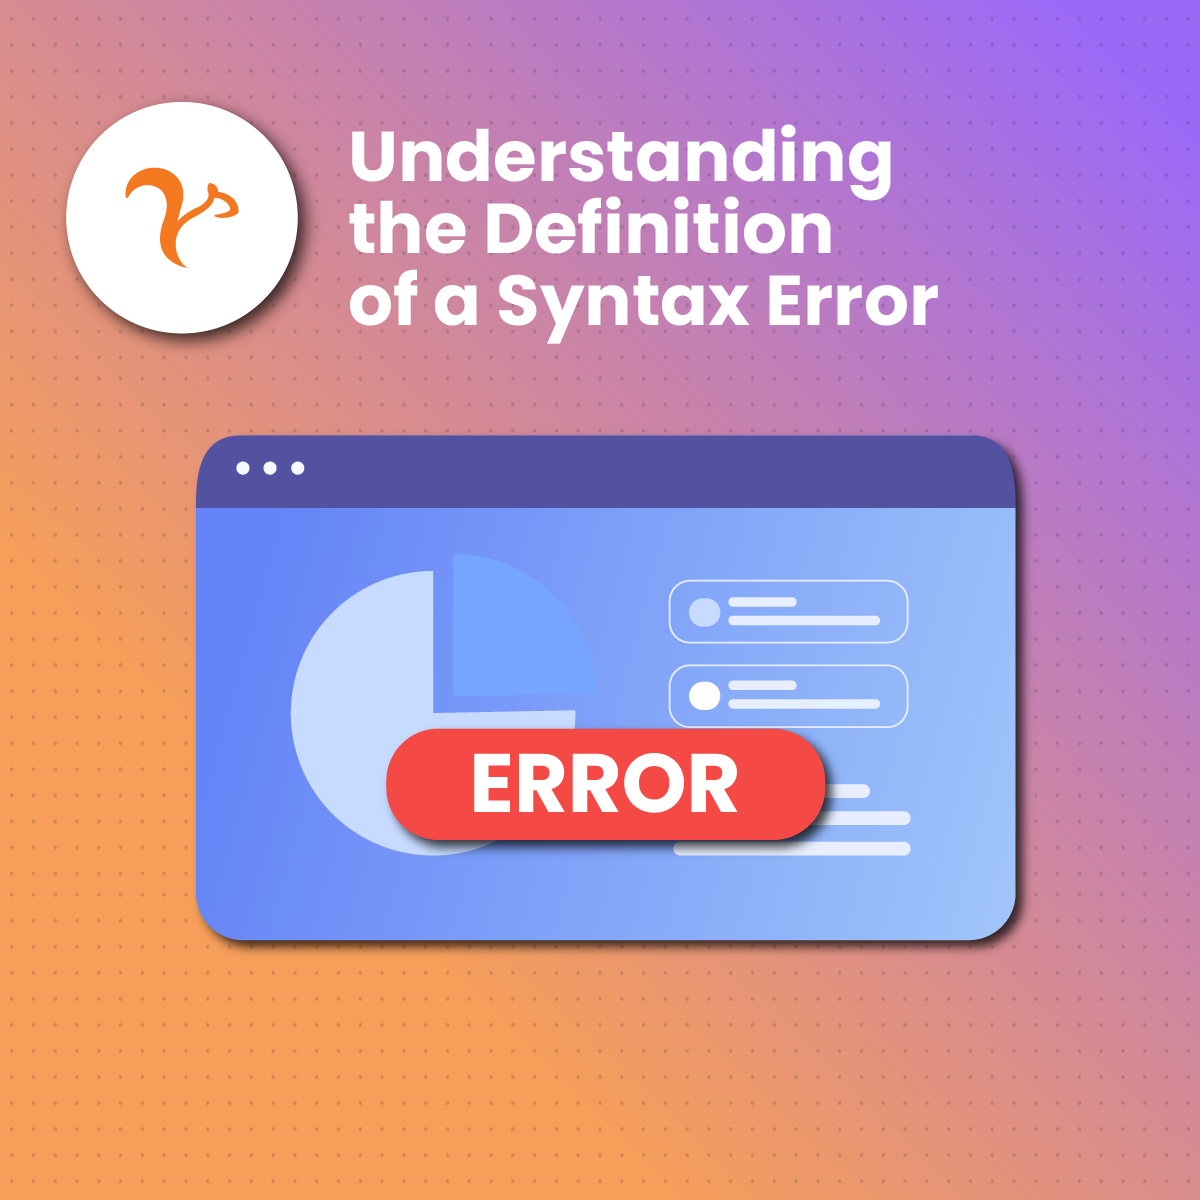 Understanding the Definition of a Syntax Error